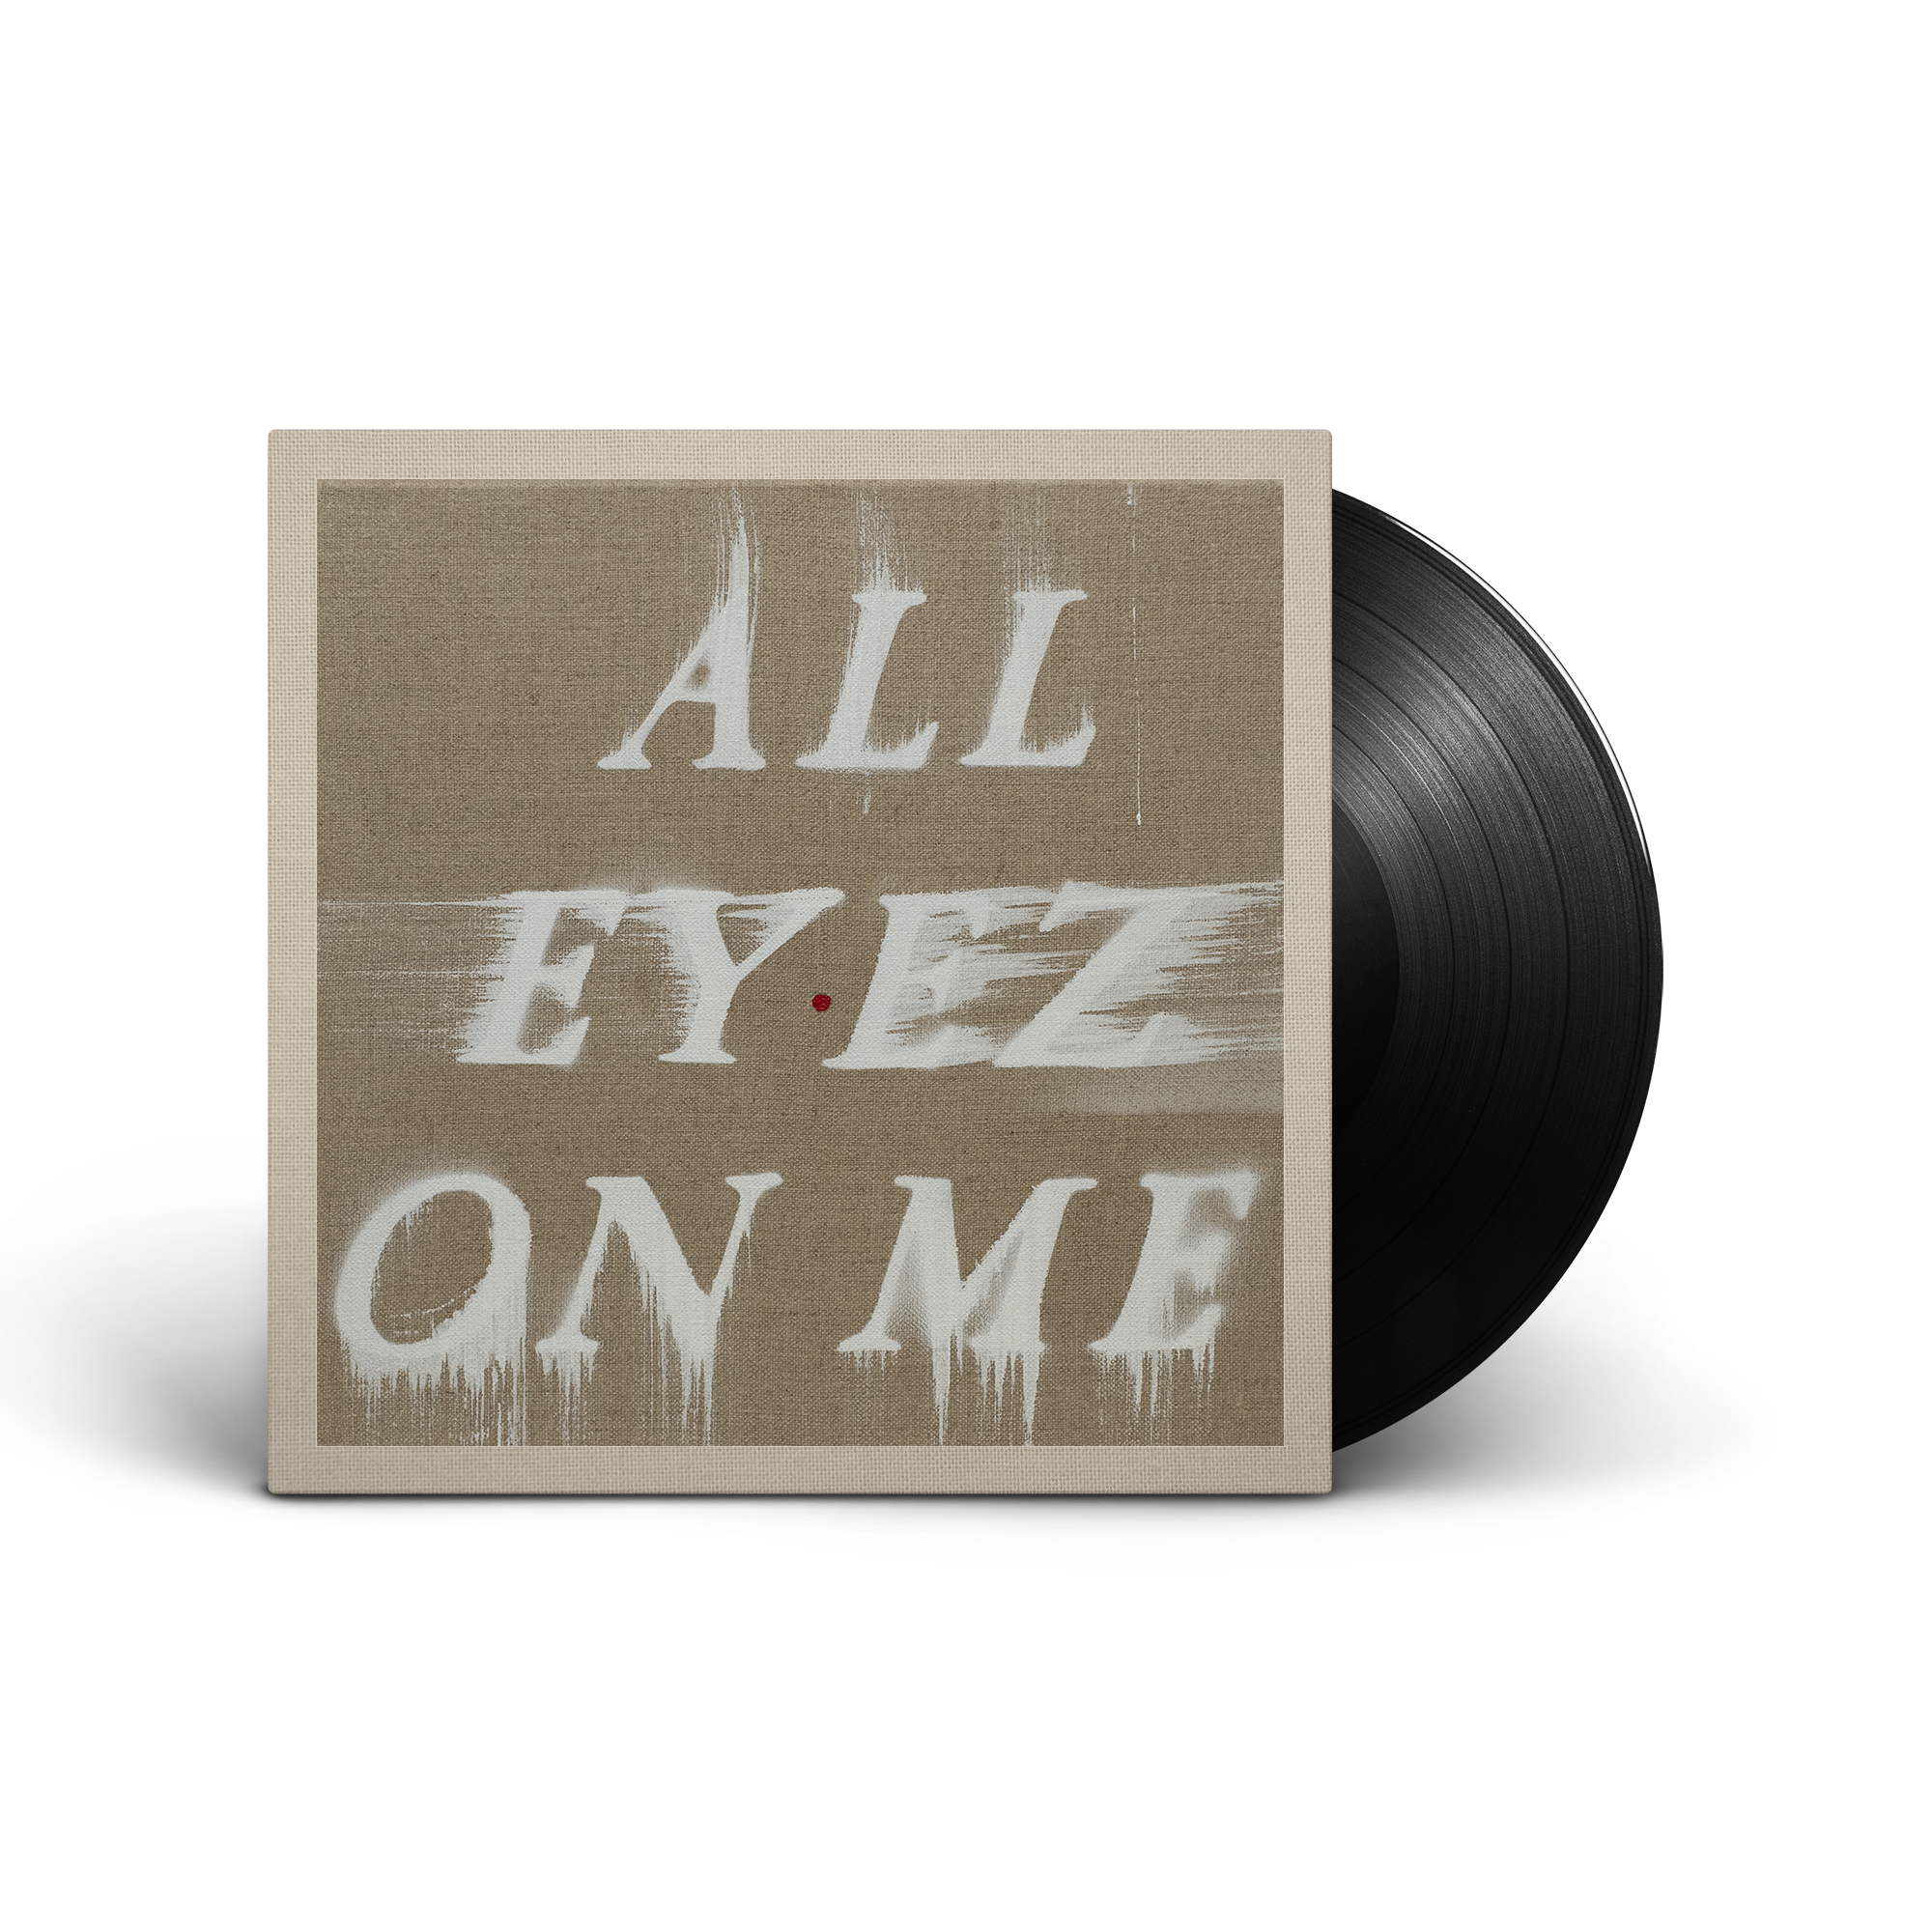 Oh En skønne dag overgive 2Pac - All Eyez On Me by Ed Ruscha Gallery Vinyl – Interscope Records